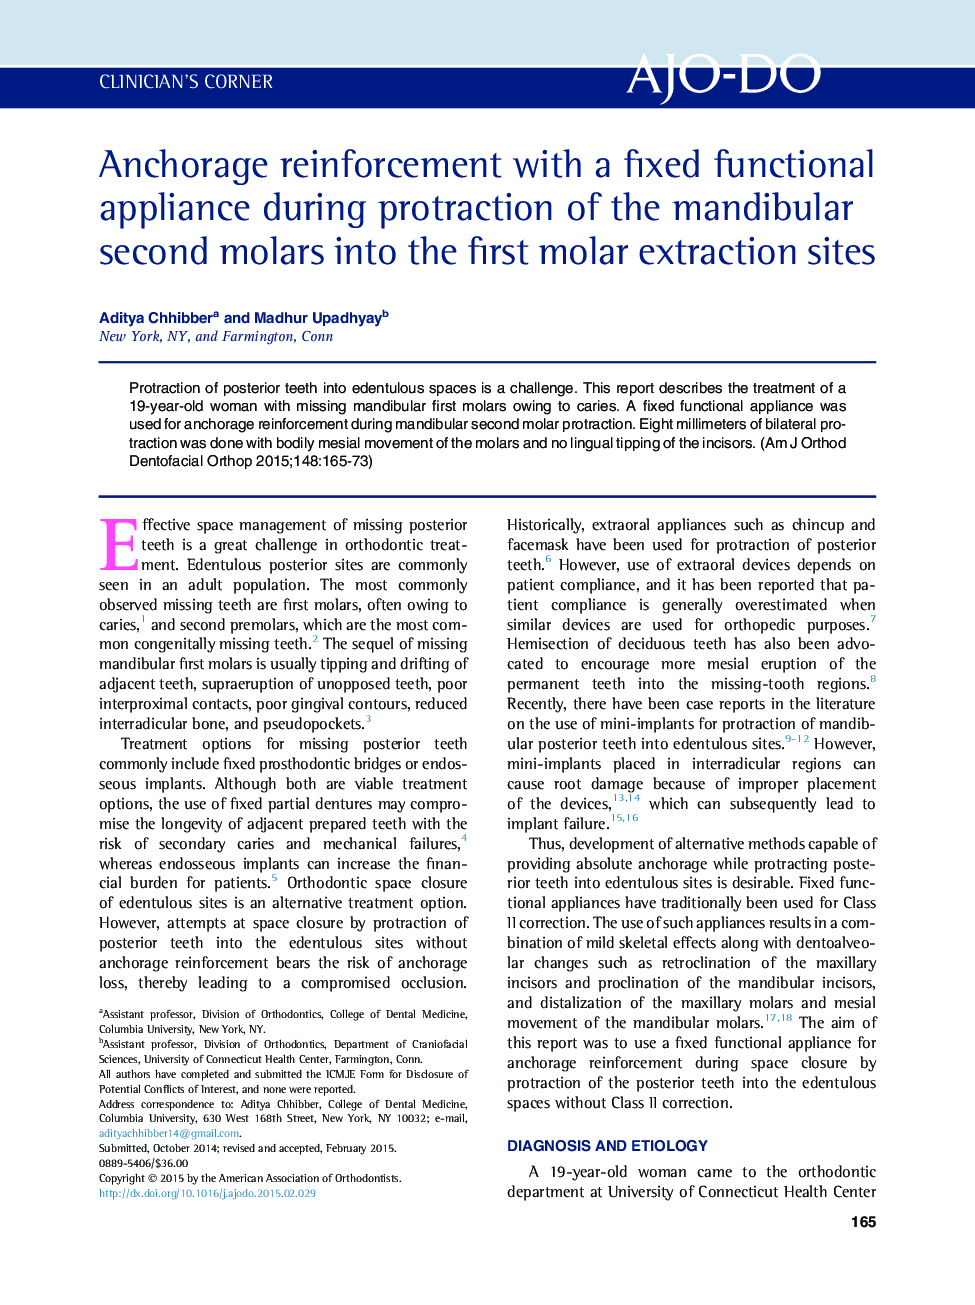 Anchorage reinforcement with a fixed functional appliance during protraction of the mandibular second molars into the first molar extraction sites 